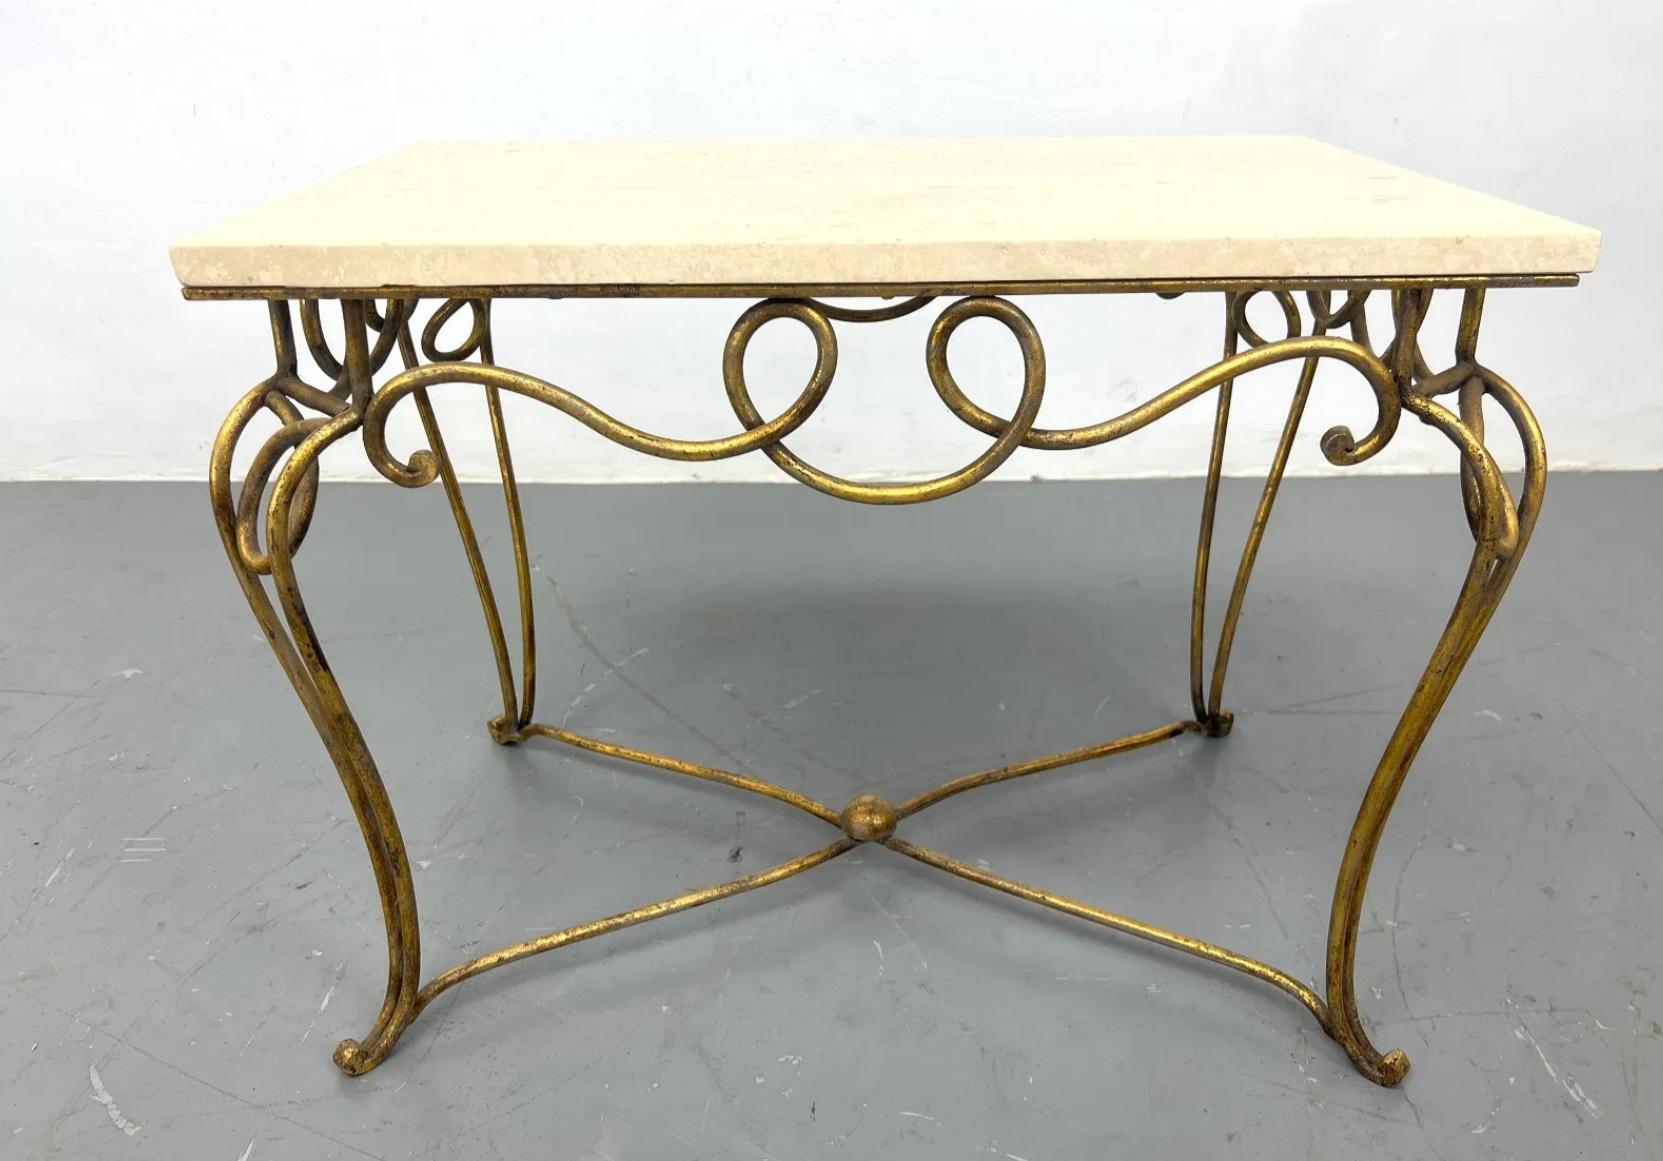 Mid-20th Century Midcentury French Rene Prou Art Deco Gilded Iron End Tables with Travertine Tops For Sale